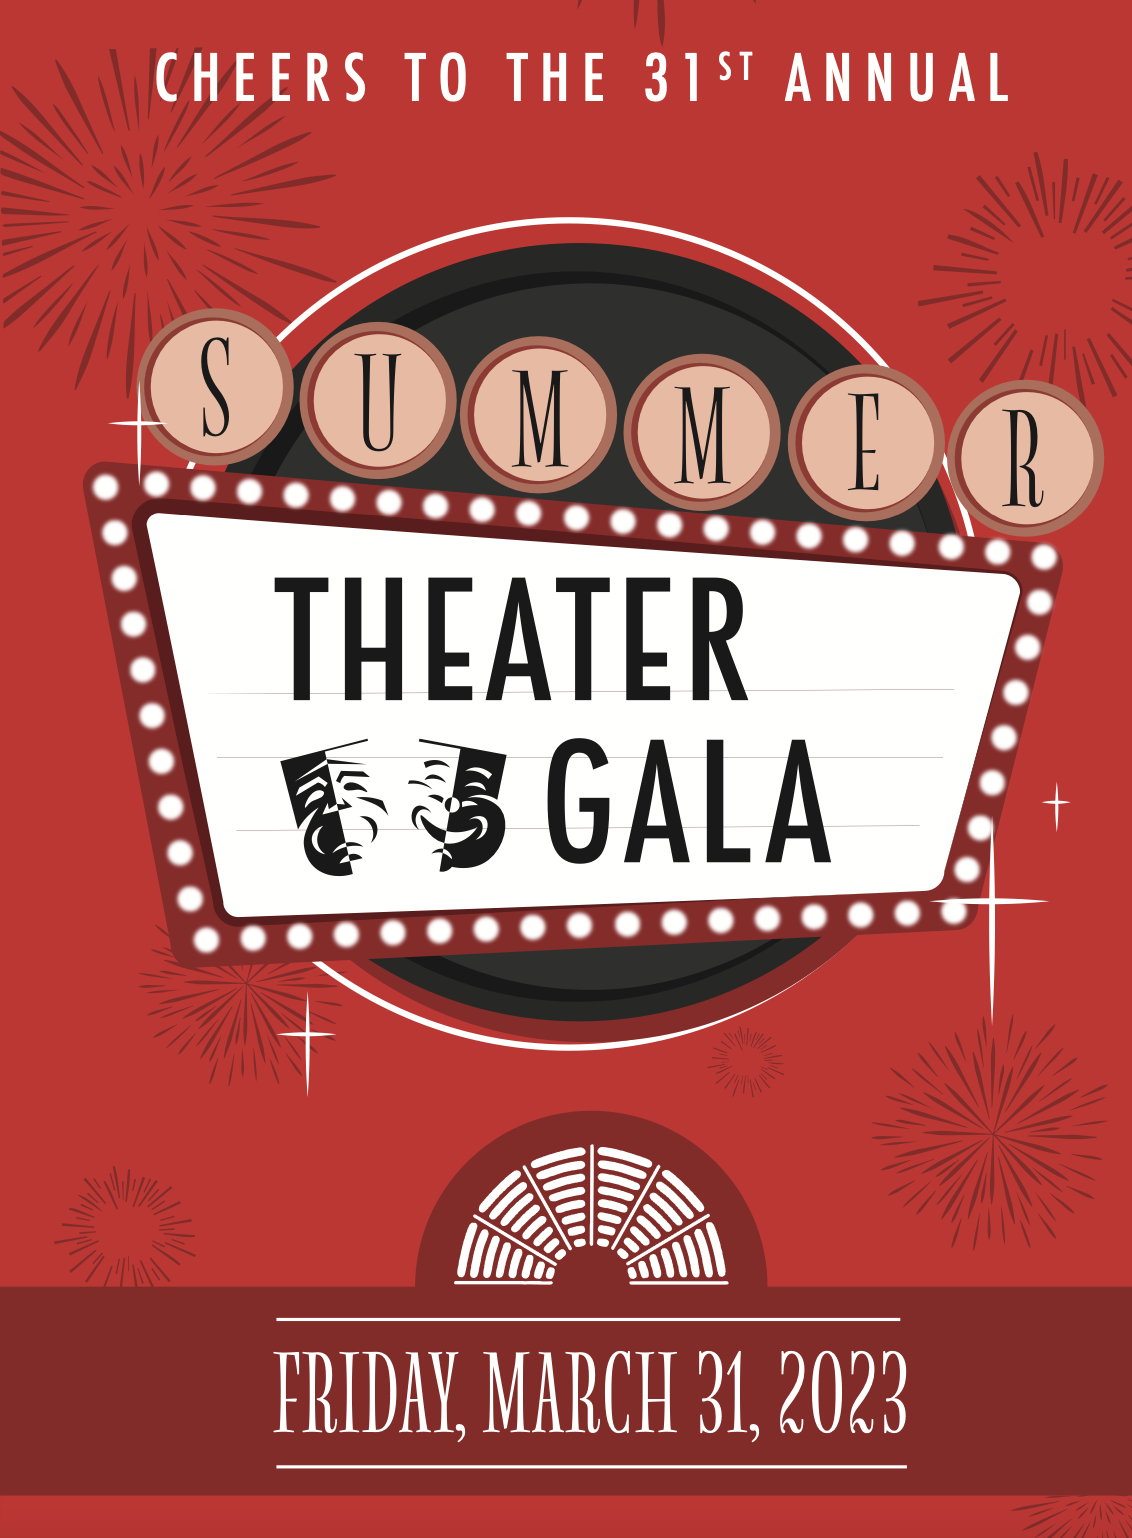 Saint Vincent Summer Theatre Gala to return on March 31